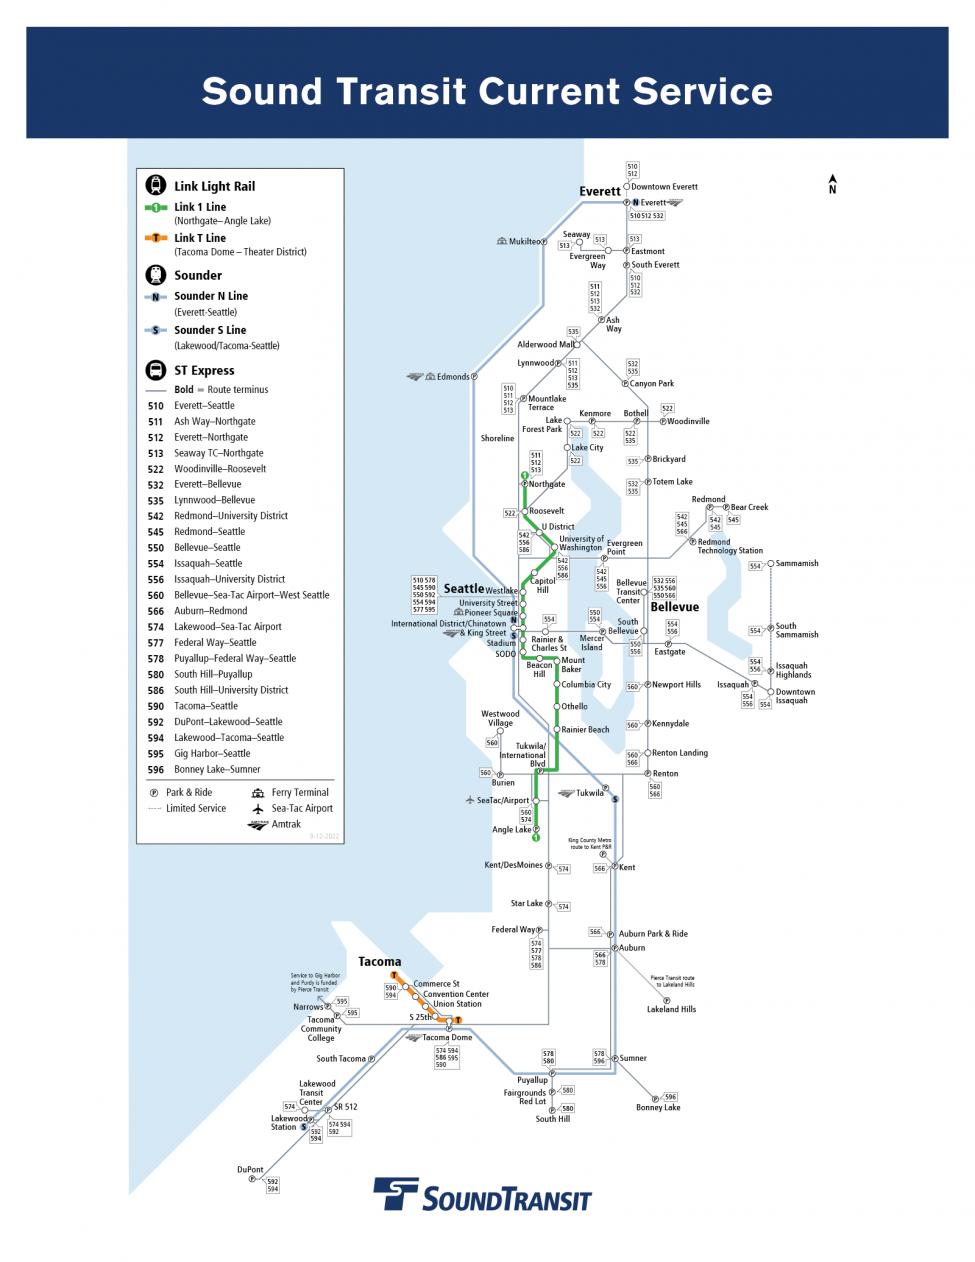 A map of Sound Transit's current service.